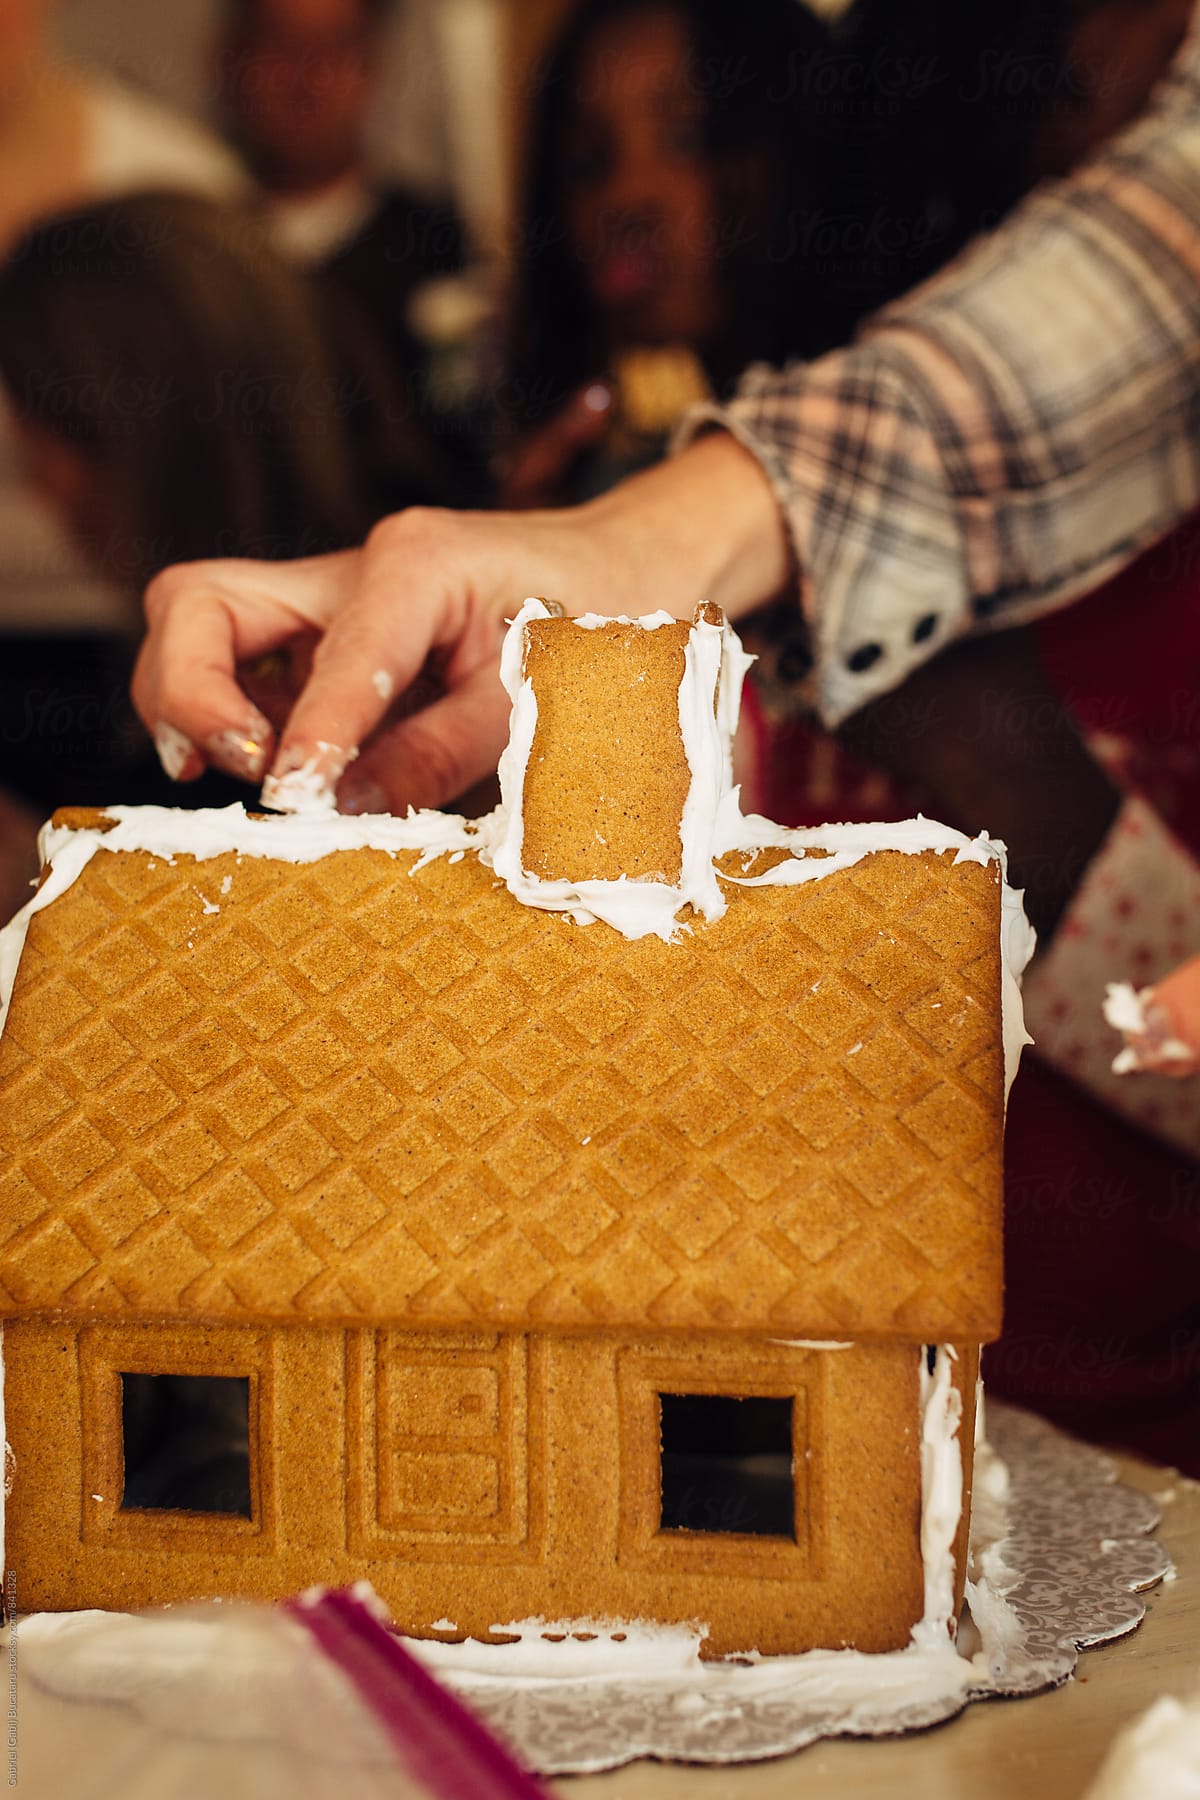 Building gingerbread houses